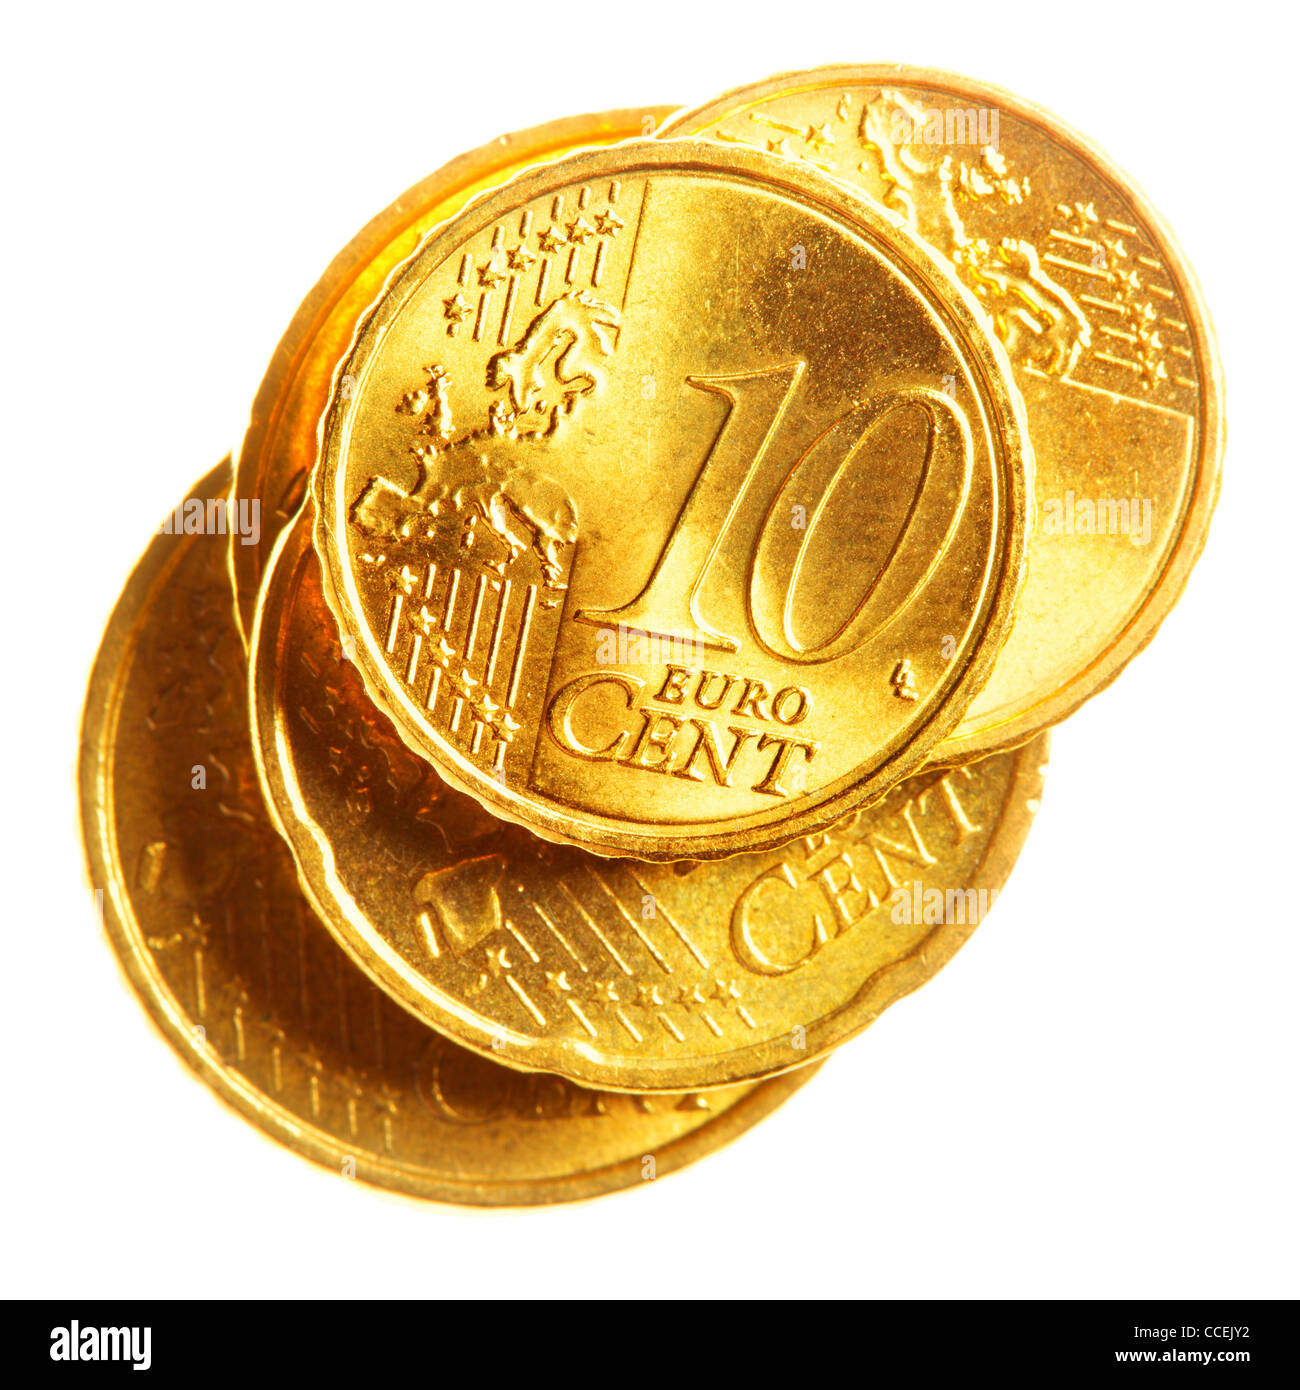 Euro cents coins isolated over white background Stock Photo